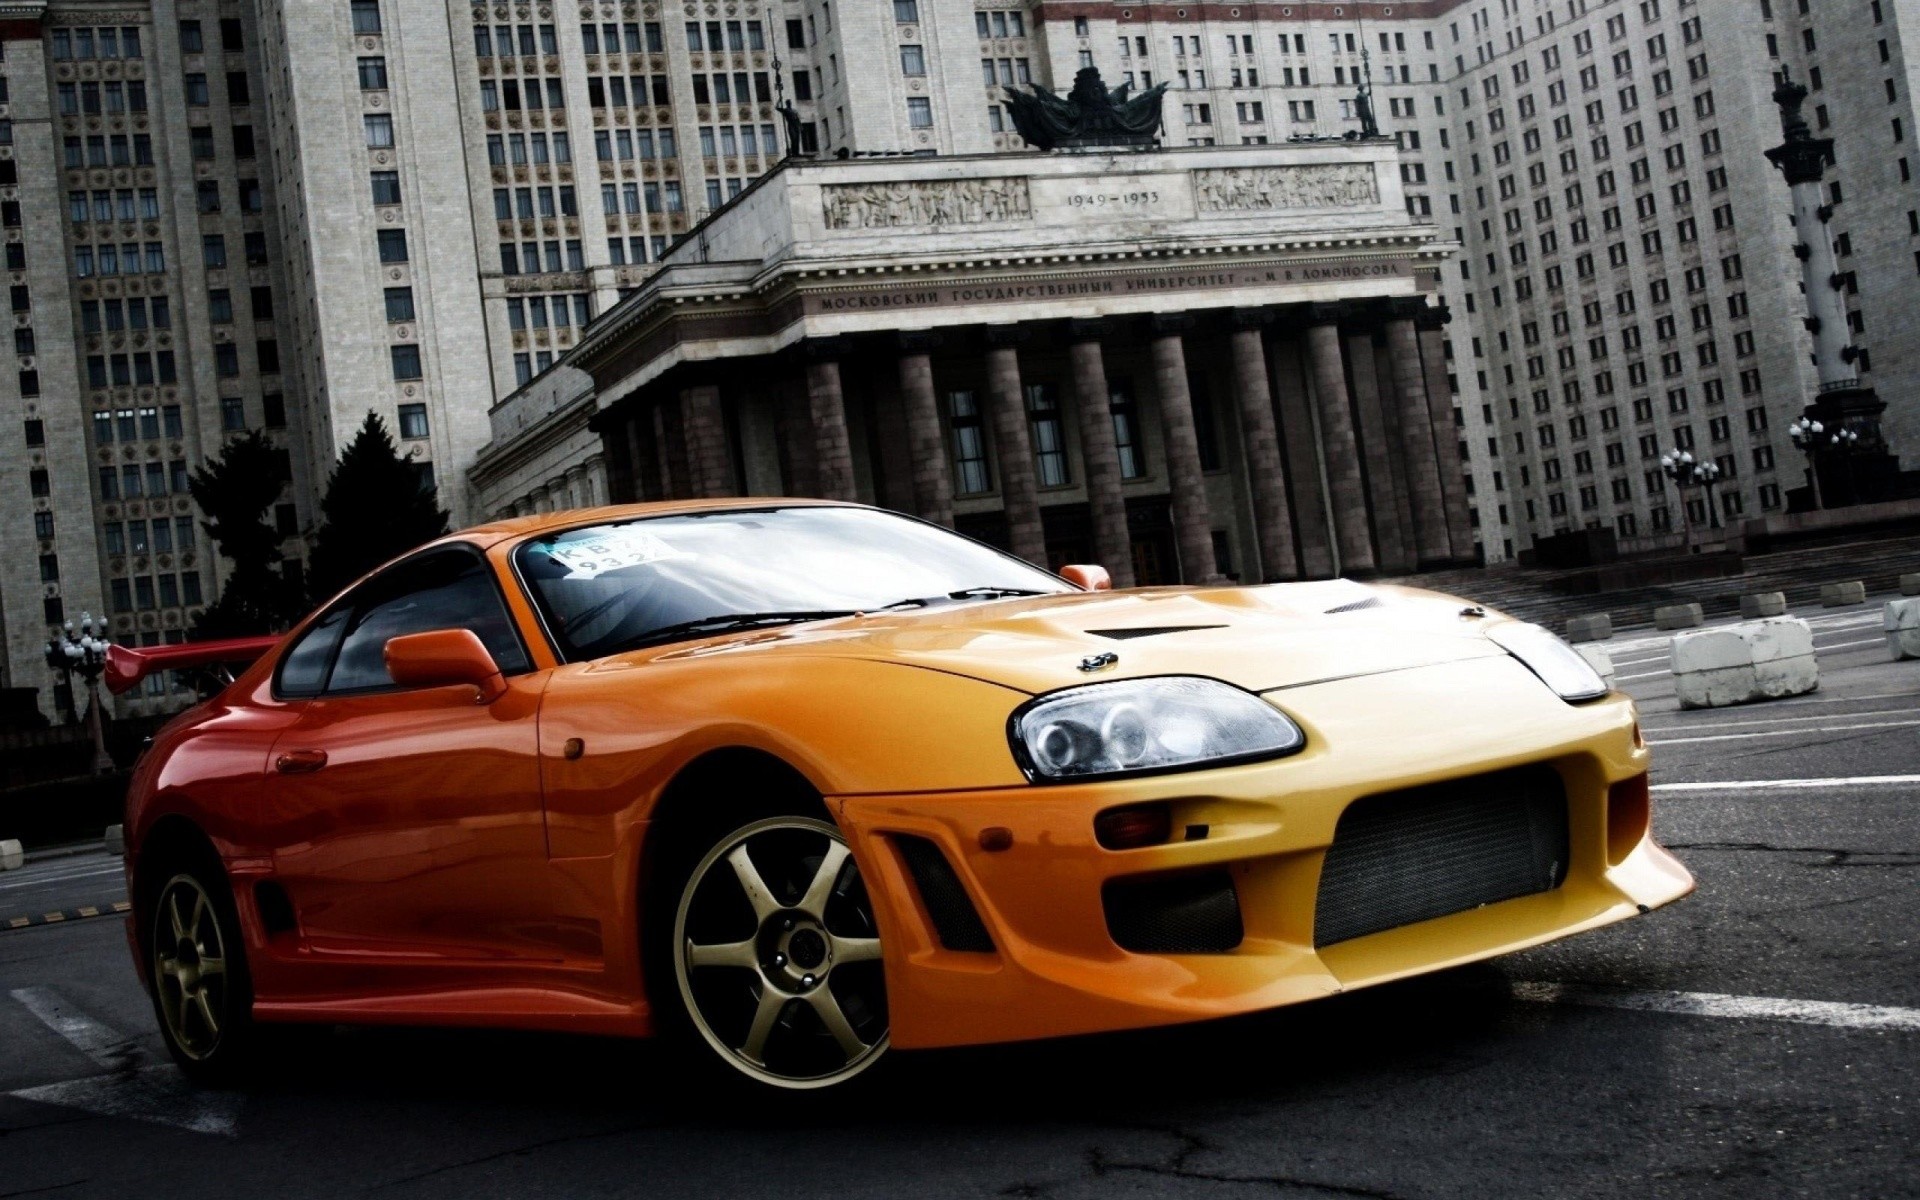 1920x1200 Supra Wallpaper For Iphone #hiy | Cars | Pinterest | Toyota supra and  Wallpaper